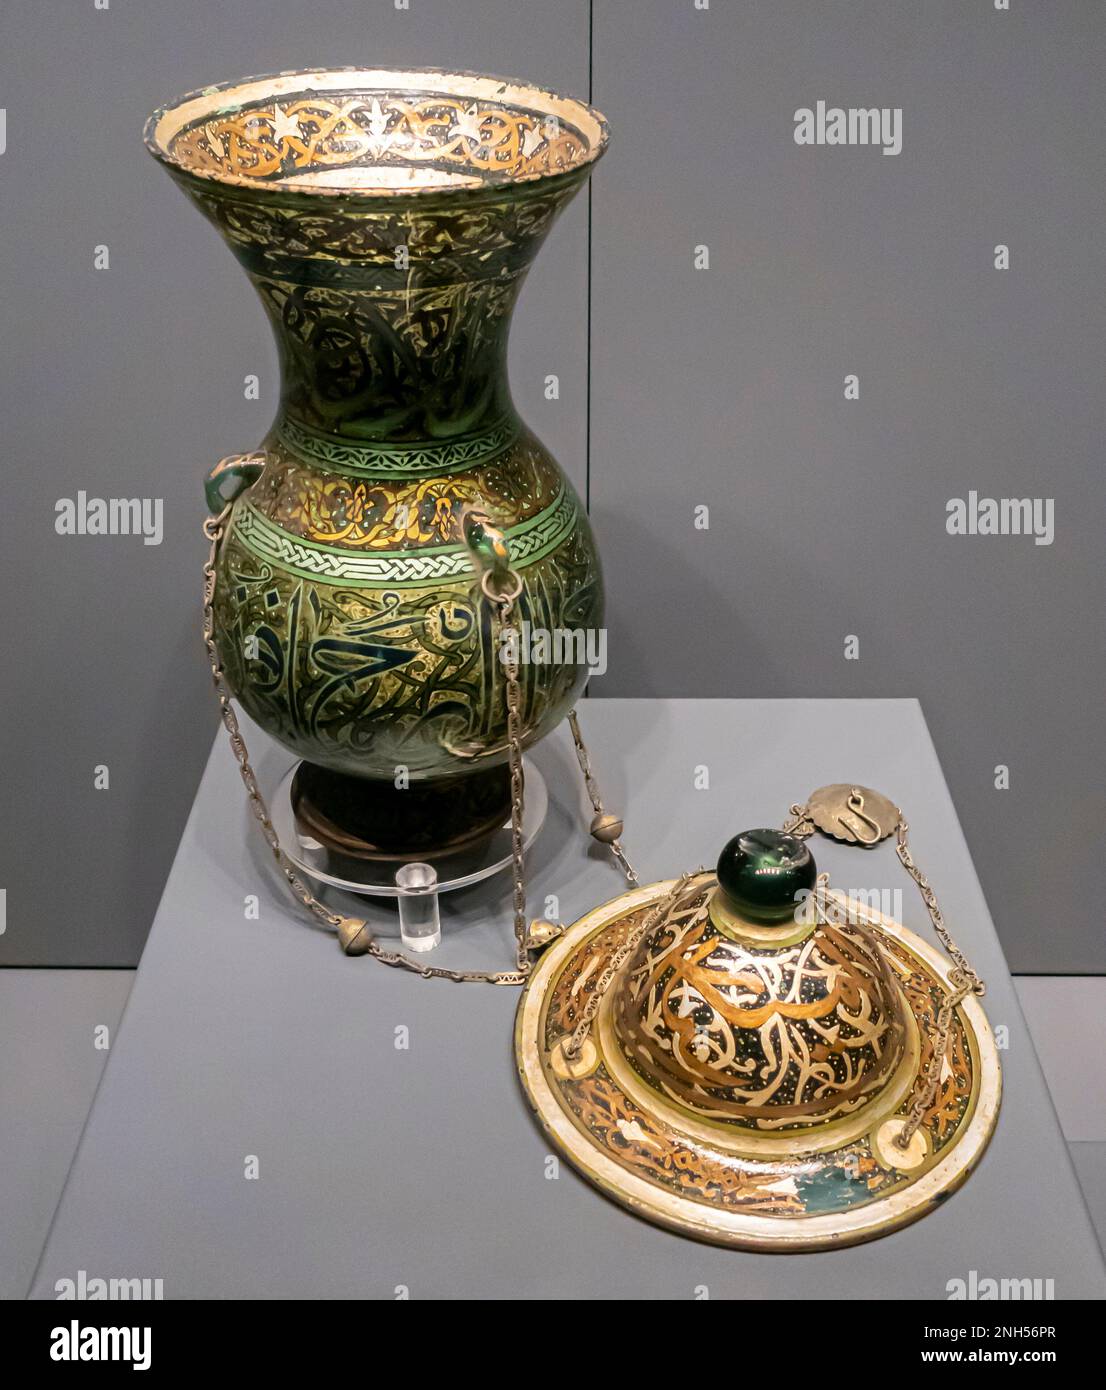 Glass mosque lamp. Mamluk period. 14th century. Museum of Turkish and Islamic Arts in Istanbul, Stock Photo